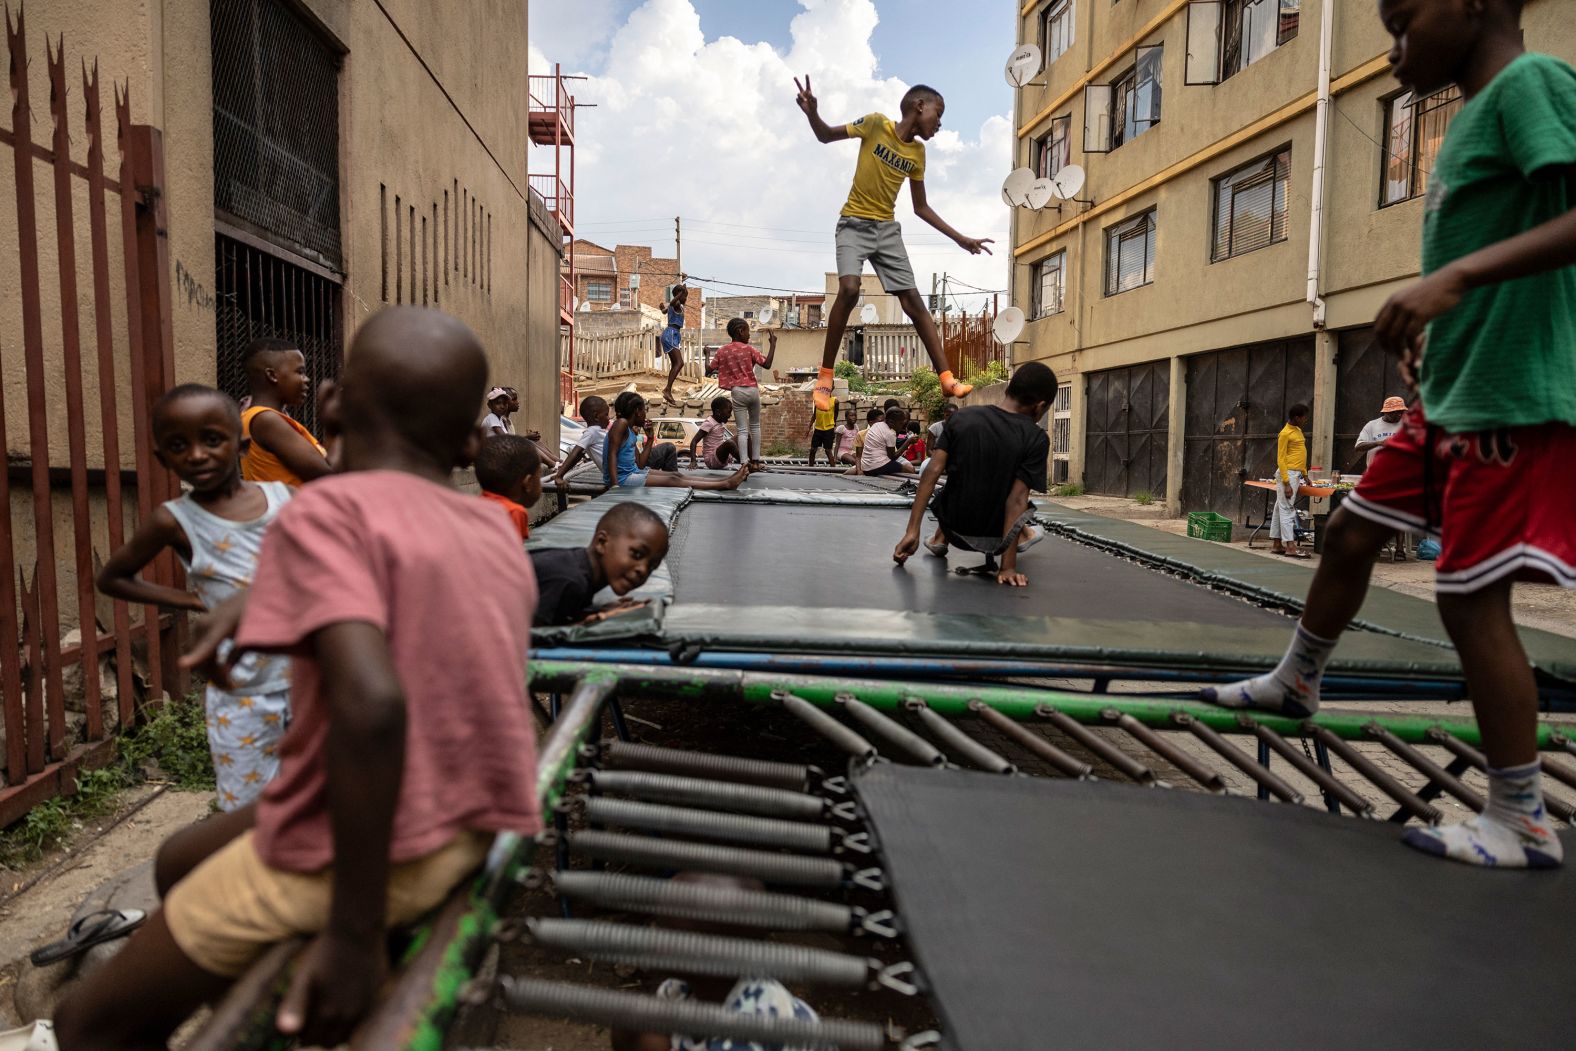 Children jump on trampolines in Alexandra, a South African township near Johannesburg, on Saturday, March 9.